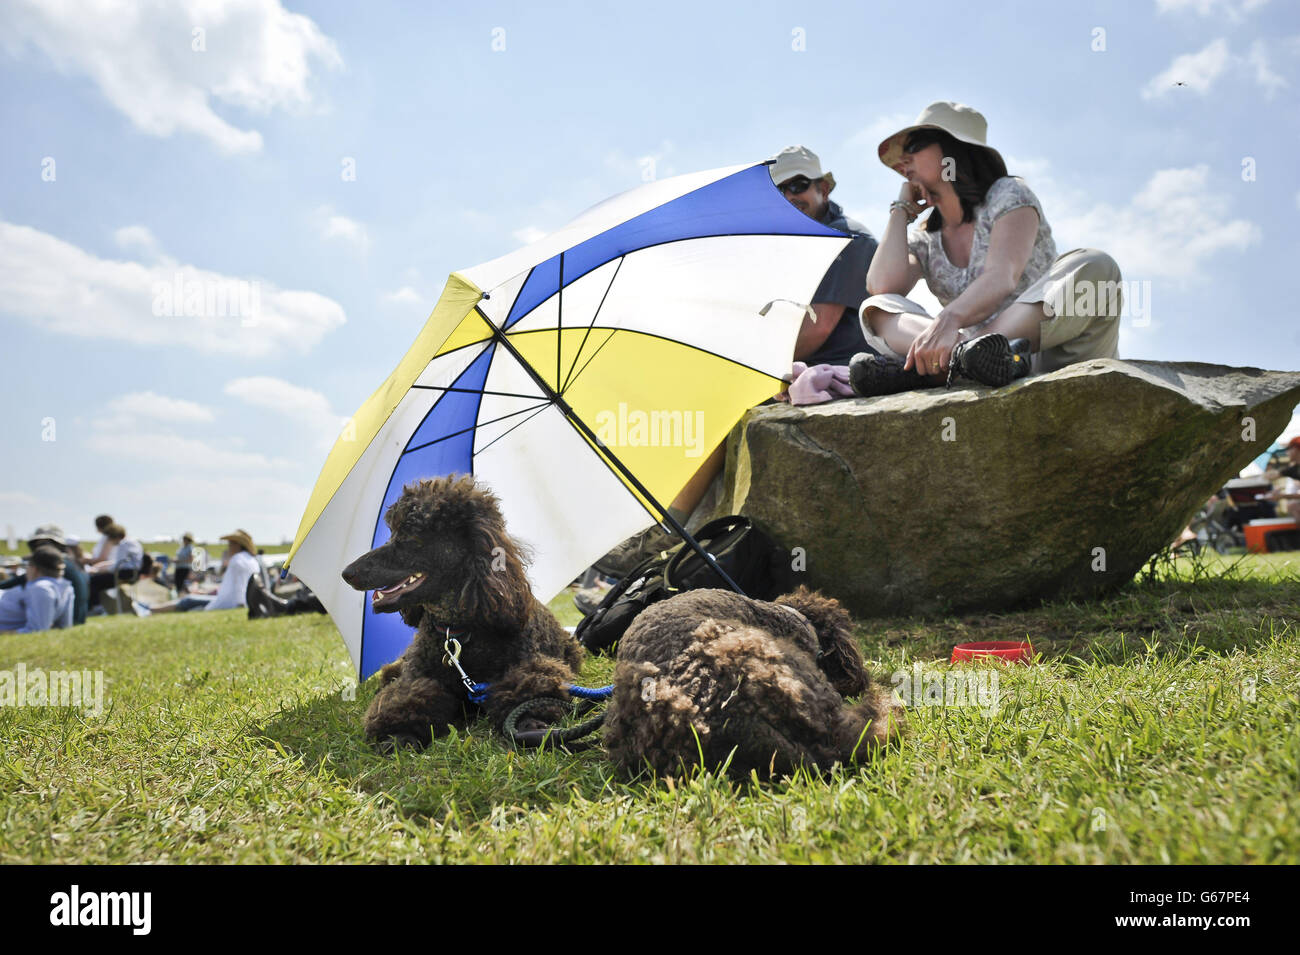 Dogs take shade under an umbrella in the hot sunshine during day three of the Barbury International Horse Trials at Barbury Castle, Wiltshire. Stock Photo